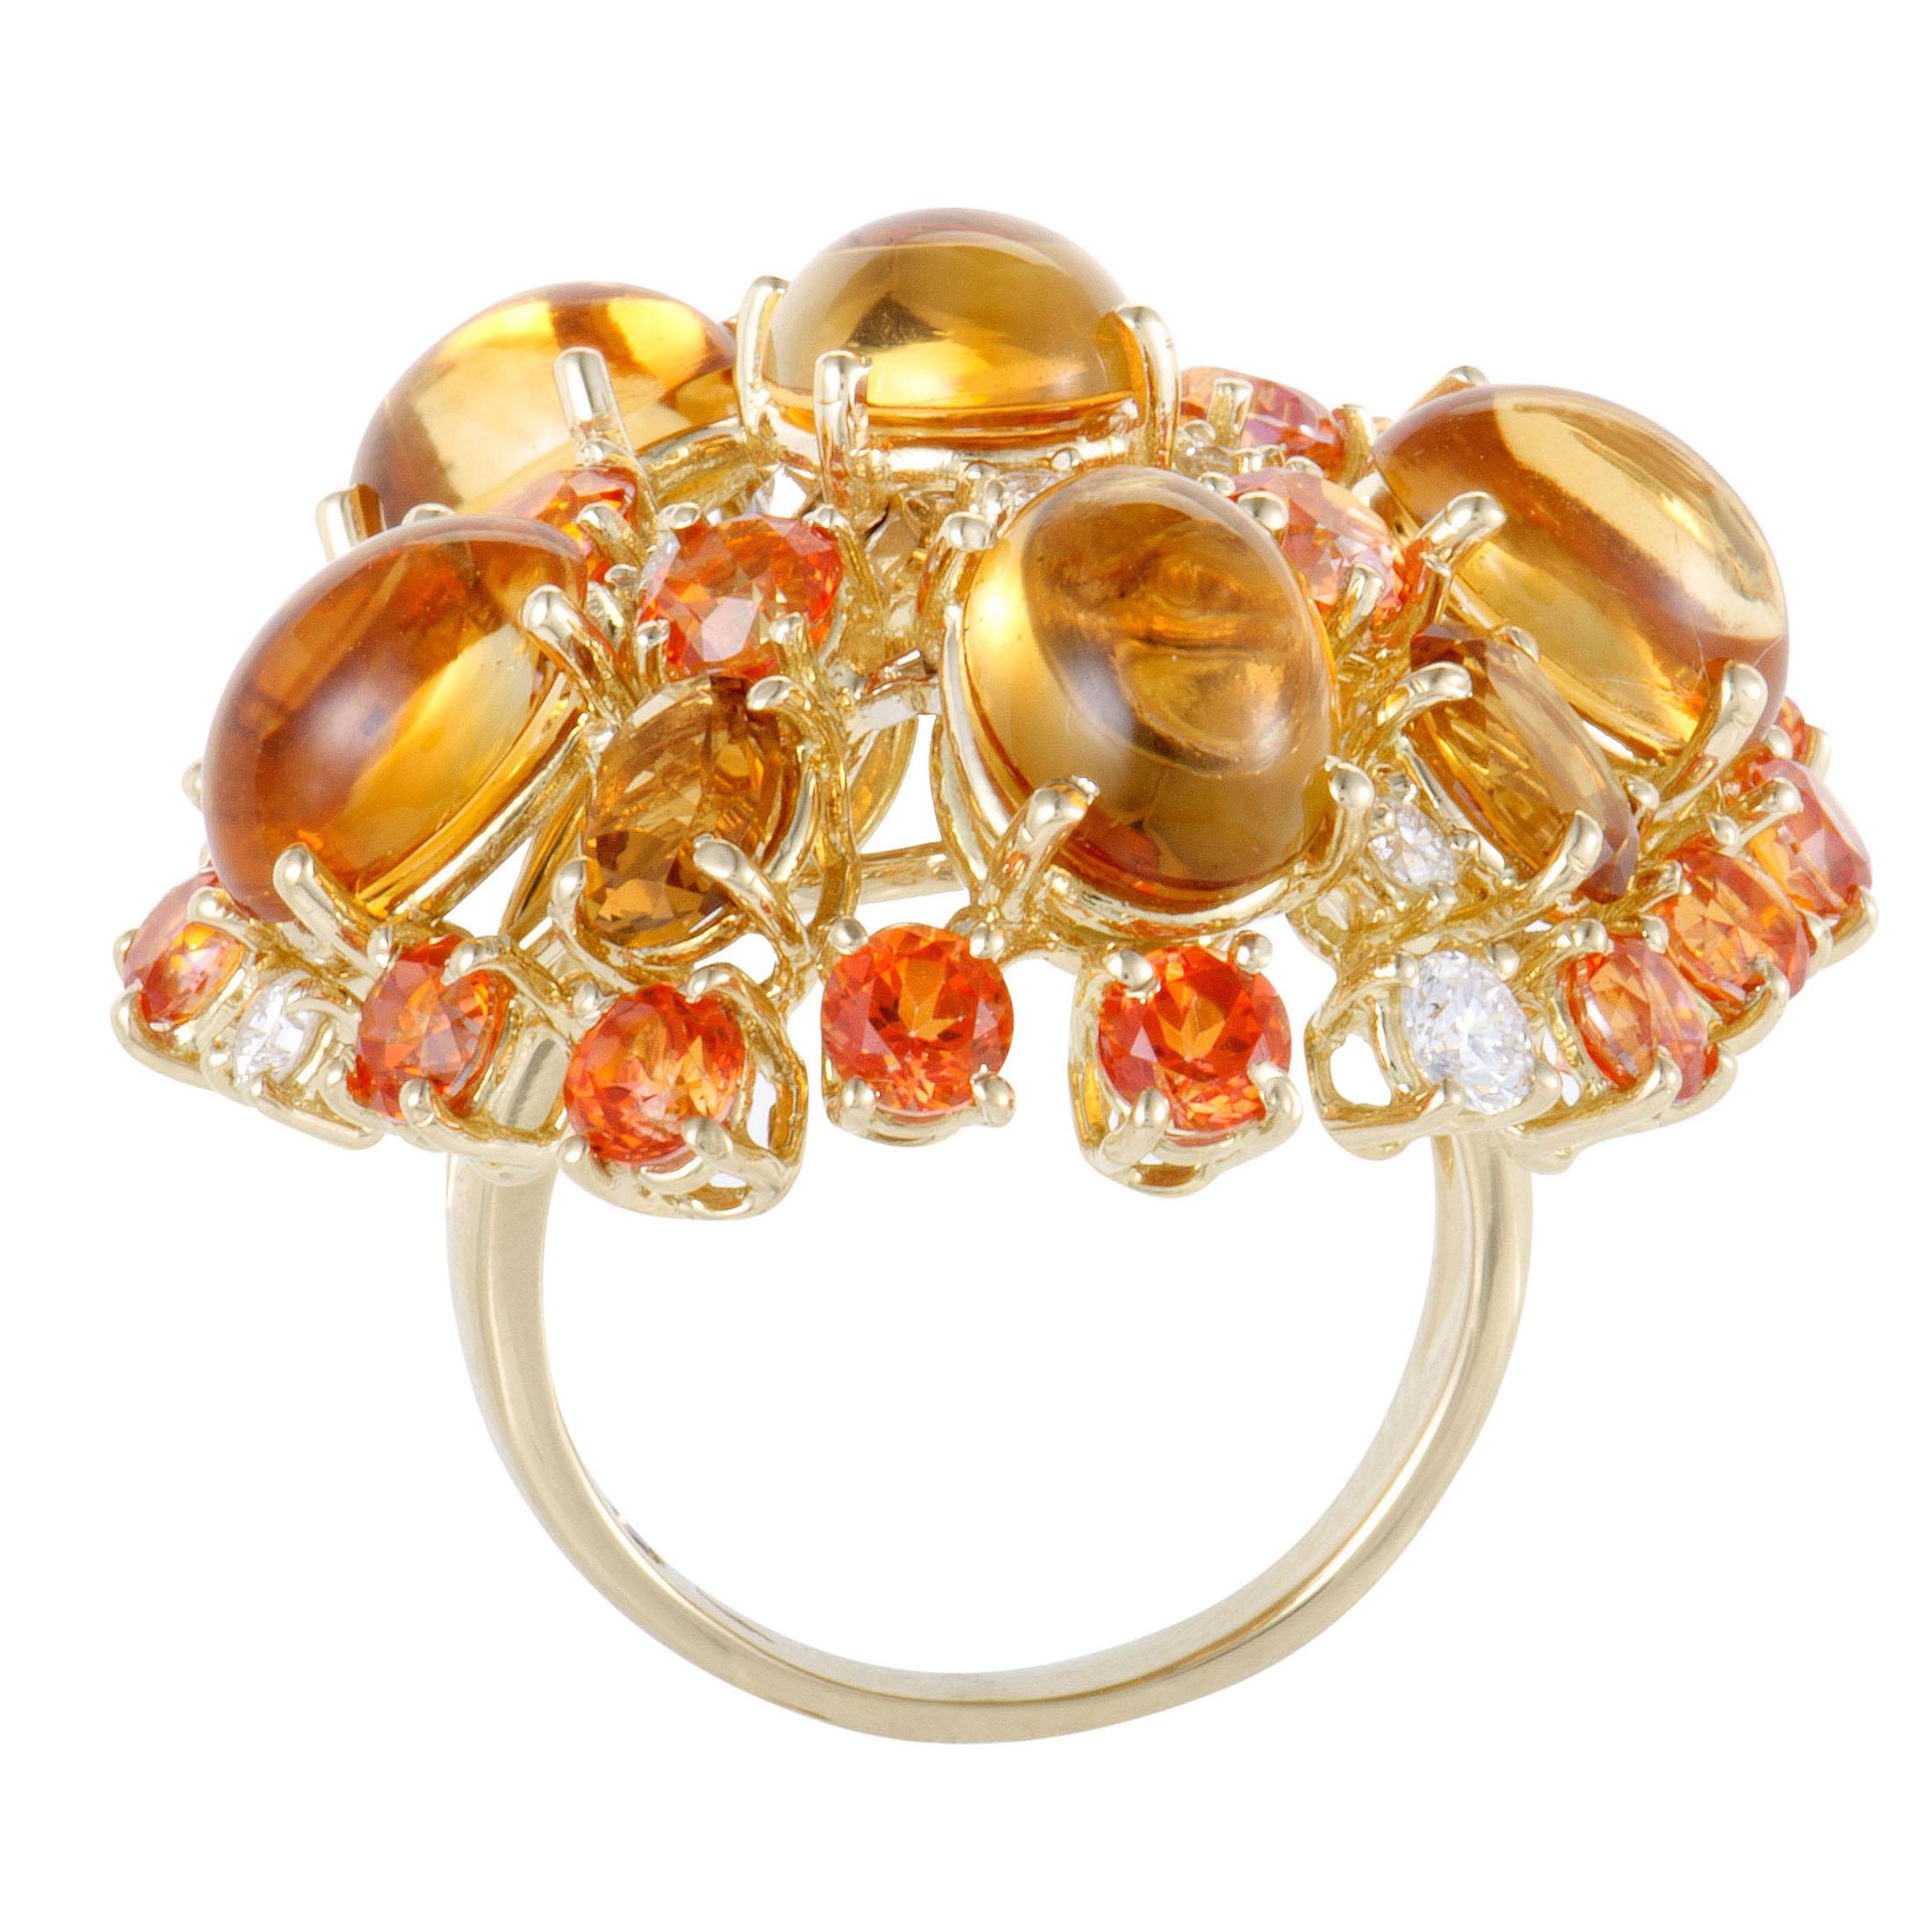 Adorned with a fine selection of gems that perfectly match the prestigious radiance of 18K yellow gold, this amazing ring from Roberto Coin boasts glistening diamonds totaling 0.55ct, orange topaz stones amounting to 6.70 carats and gorgeous yellow